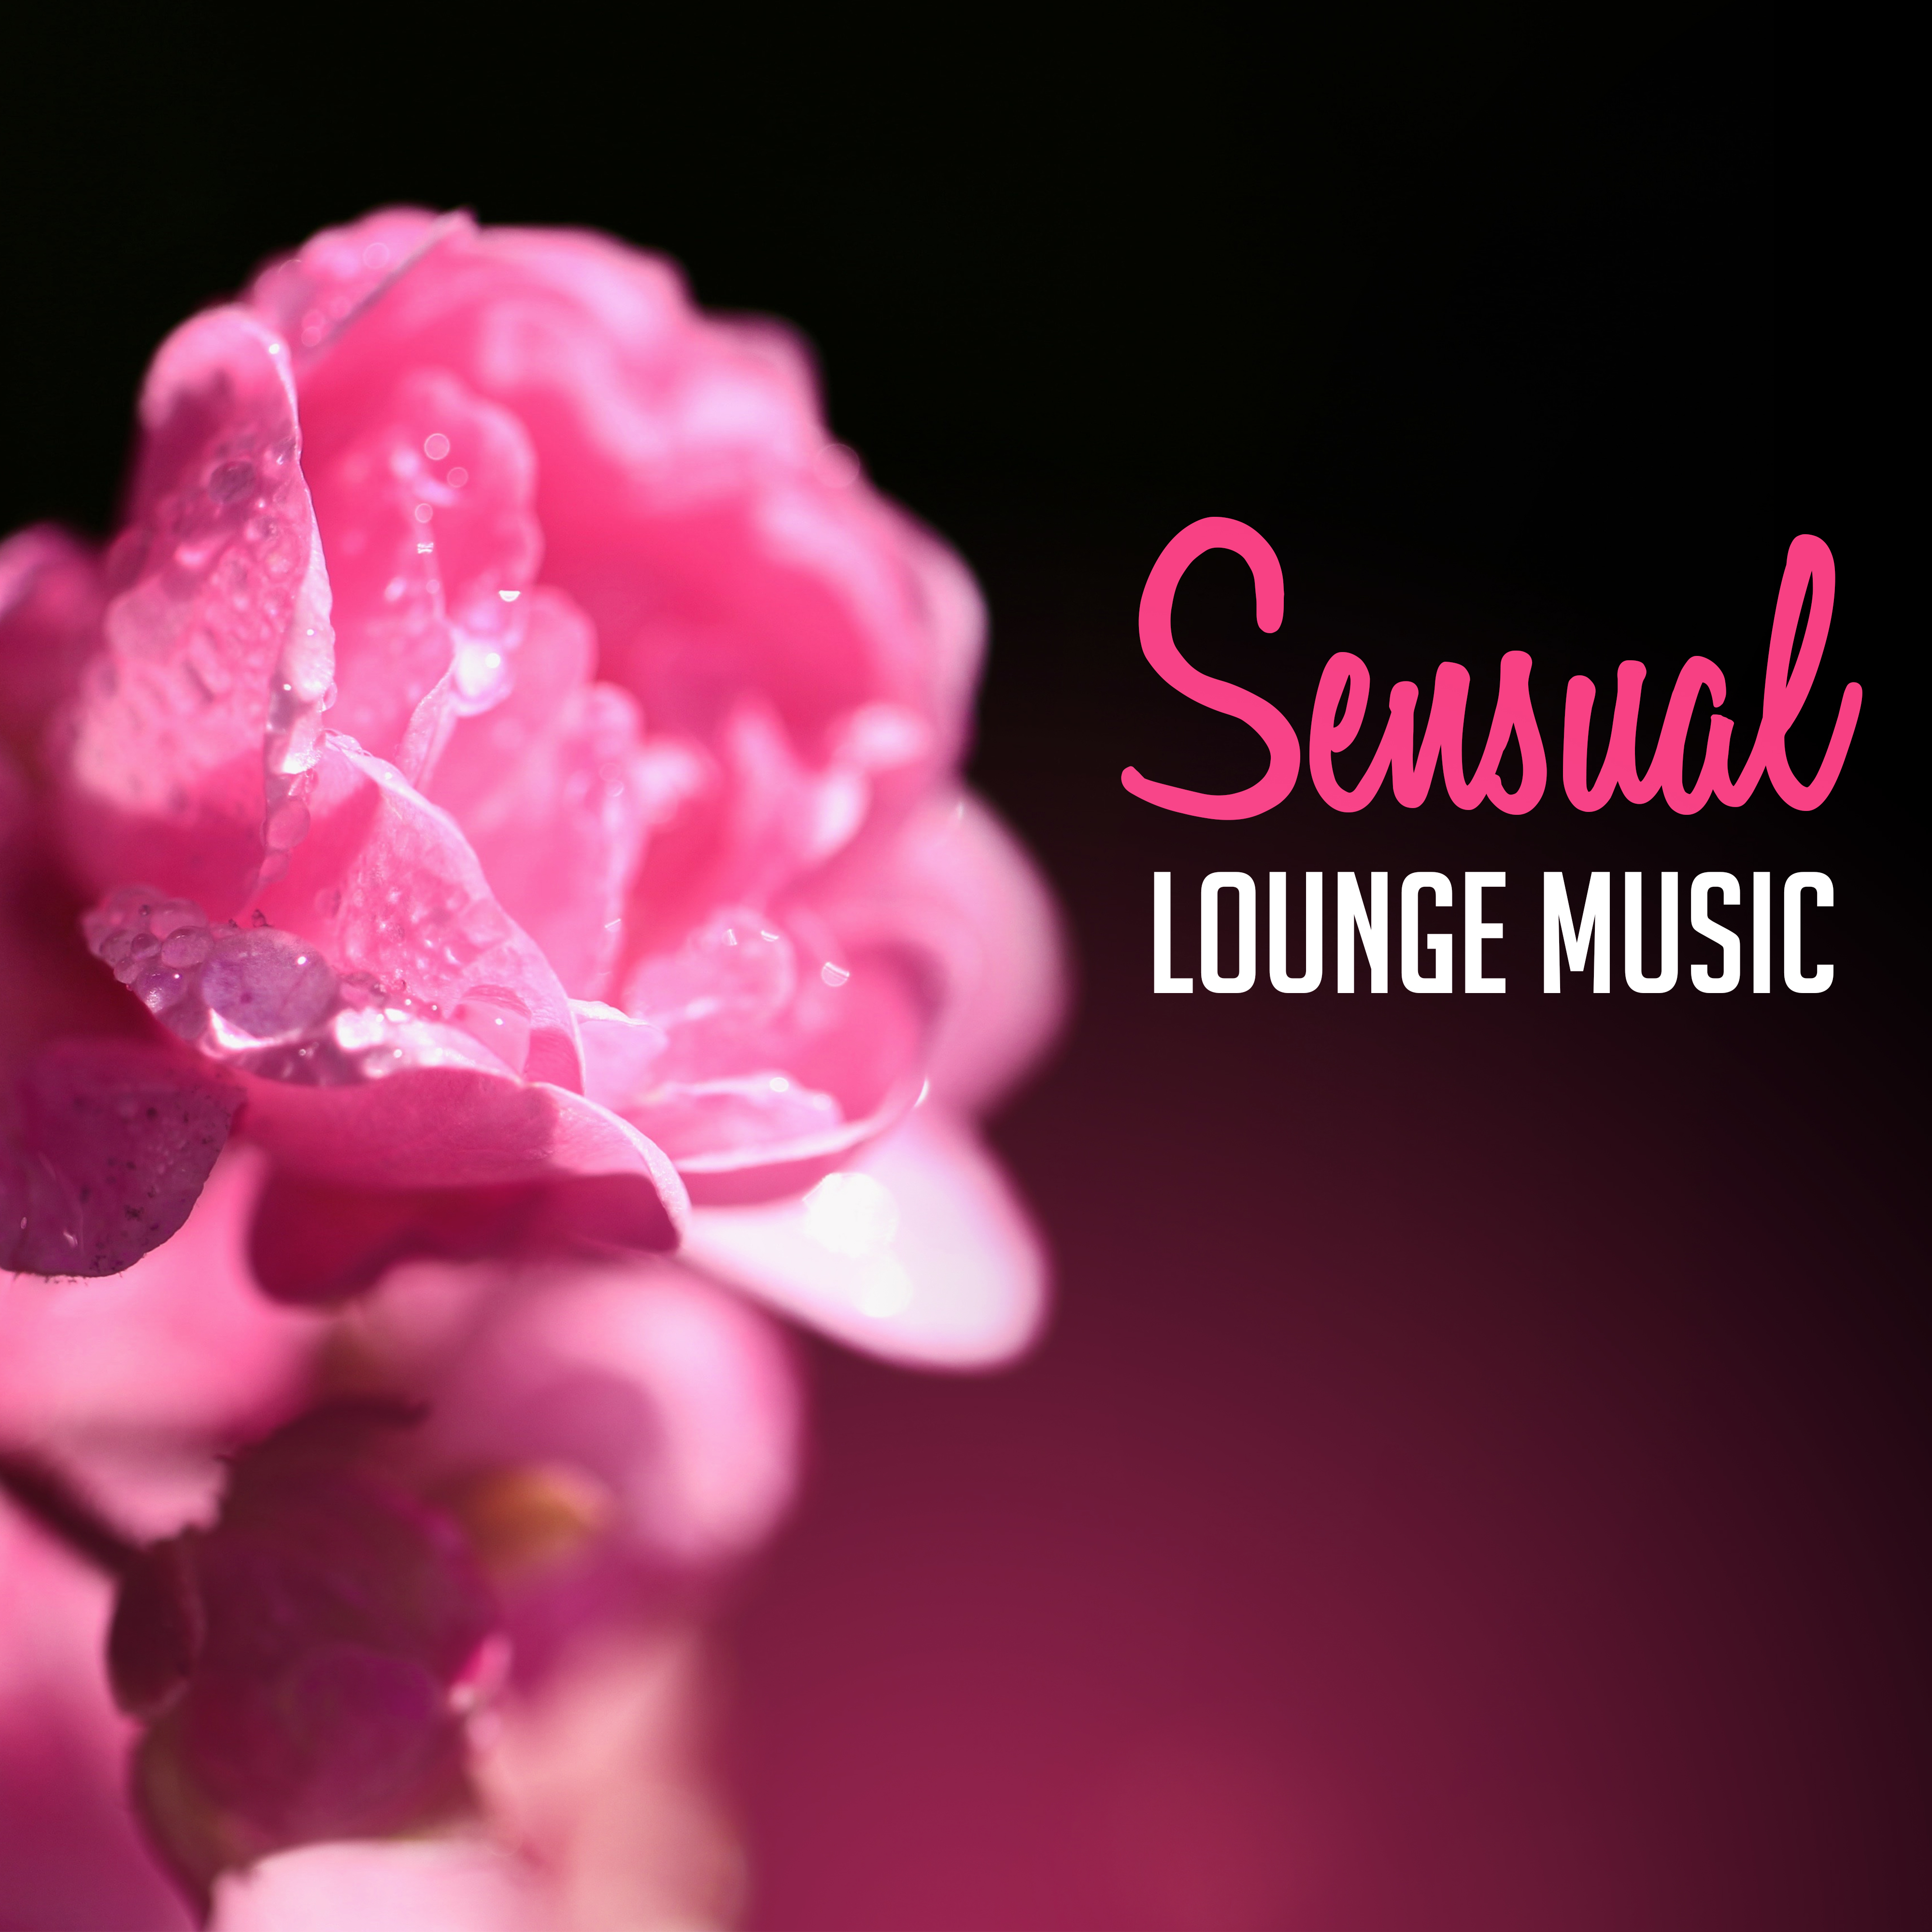 Sensual Lounge Music  Jazz, Gentle Piano, Relax for Lovers, Erotic Jazz, Intimate Moment